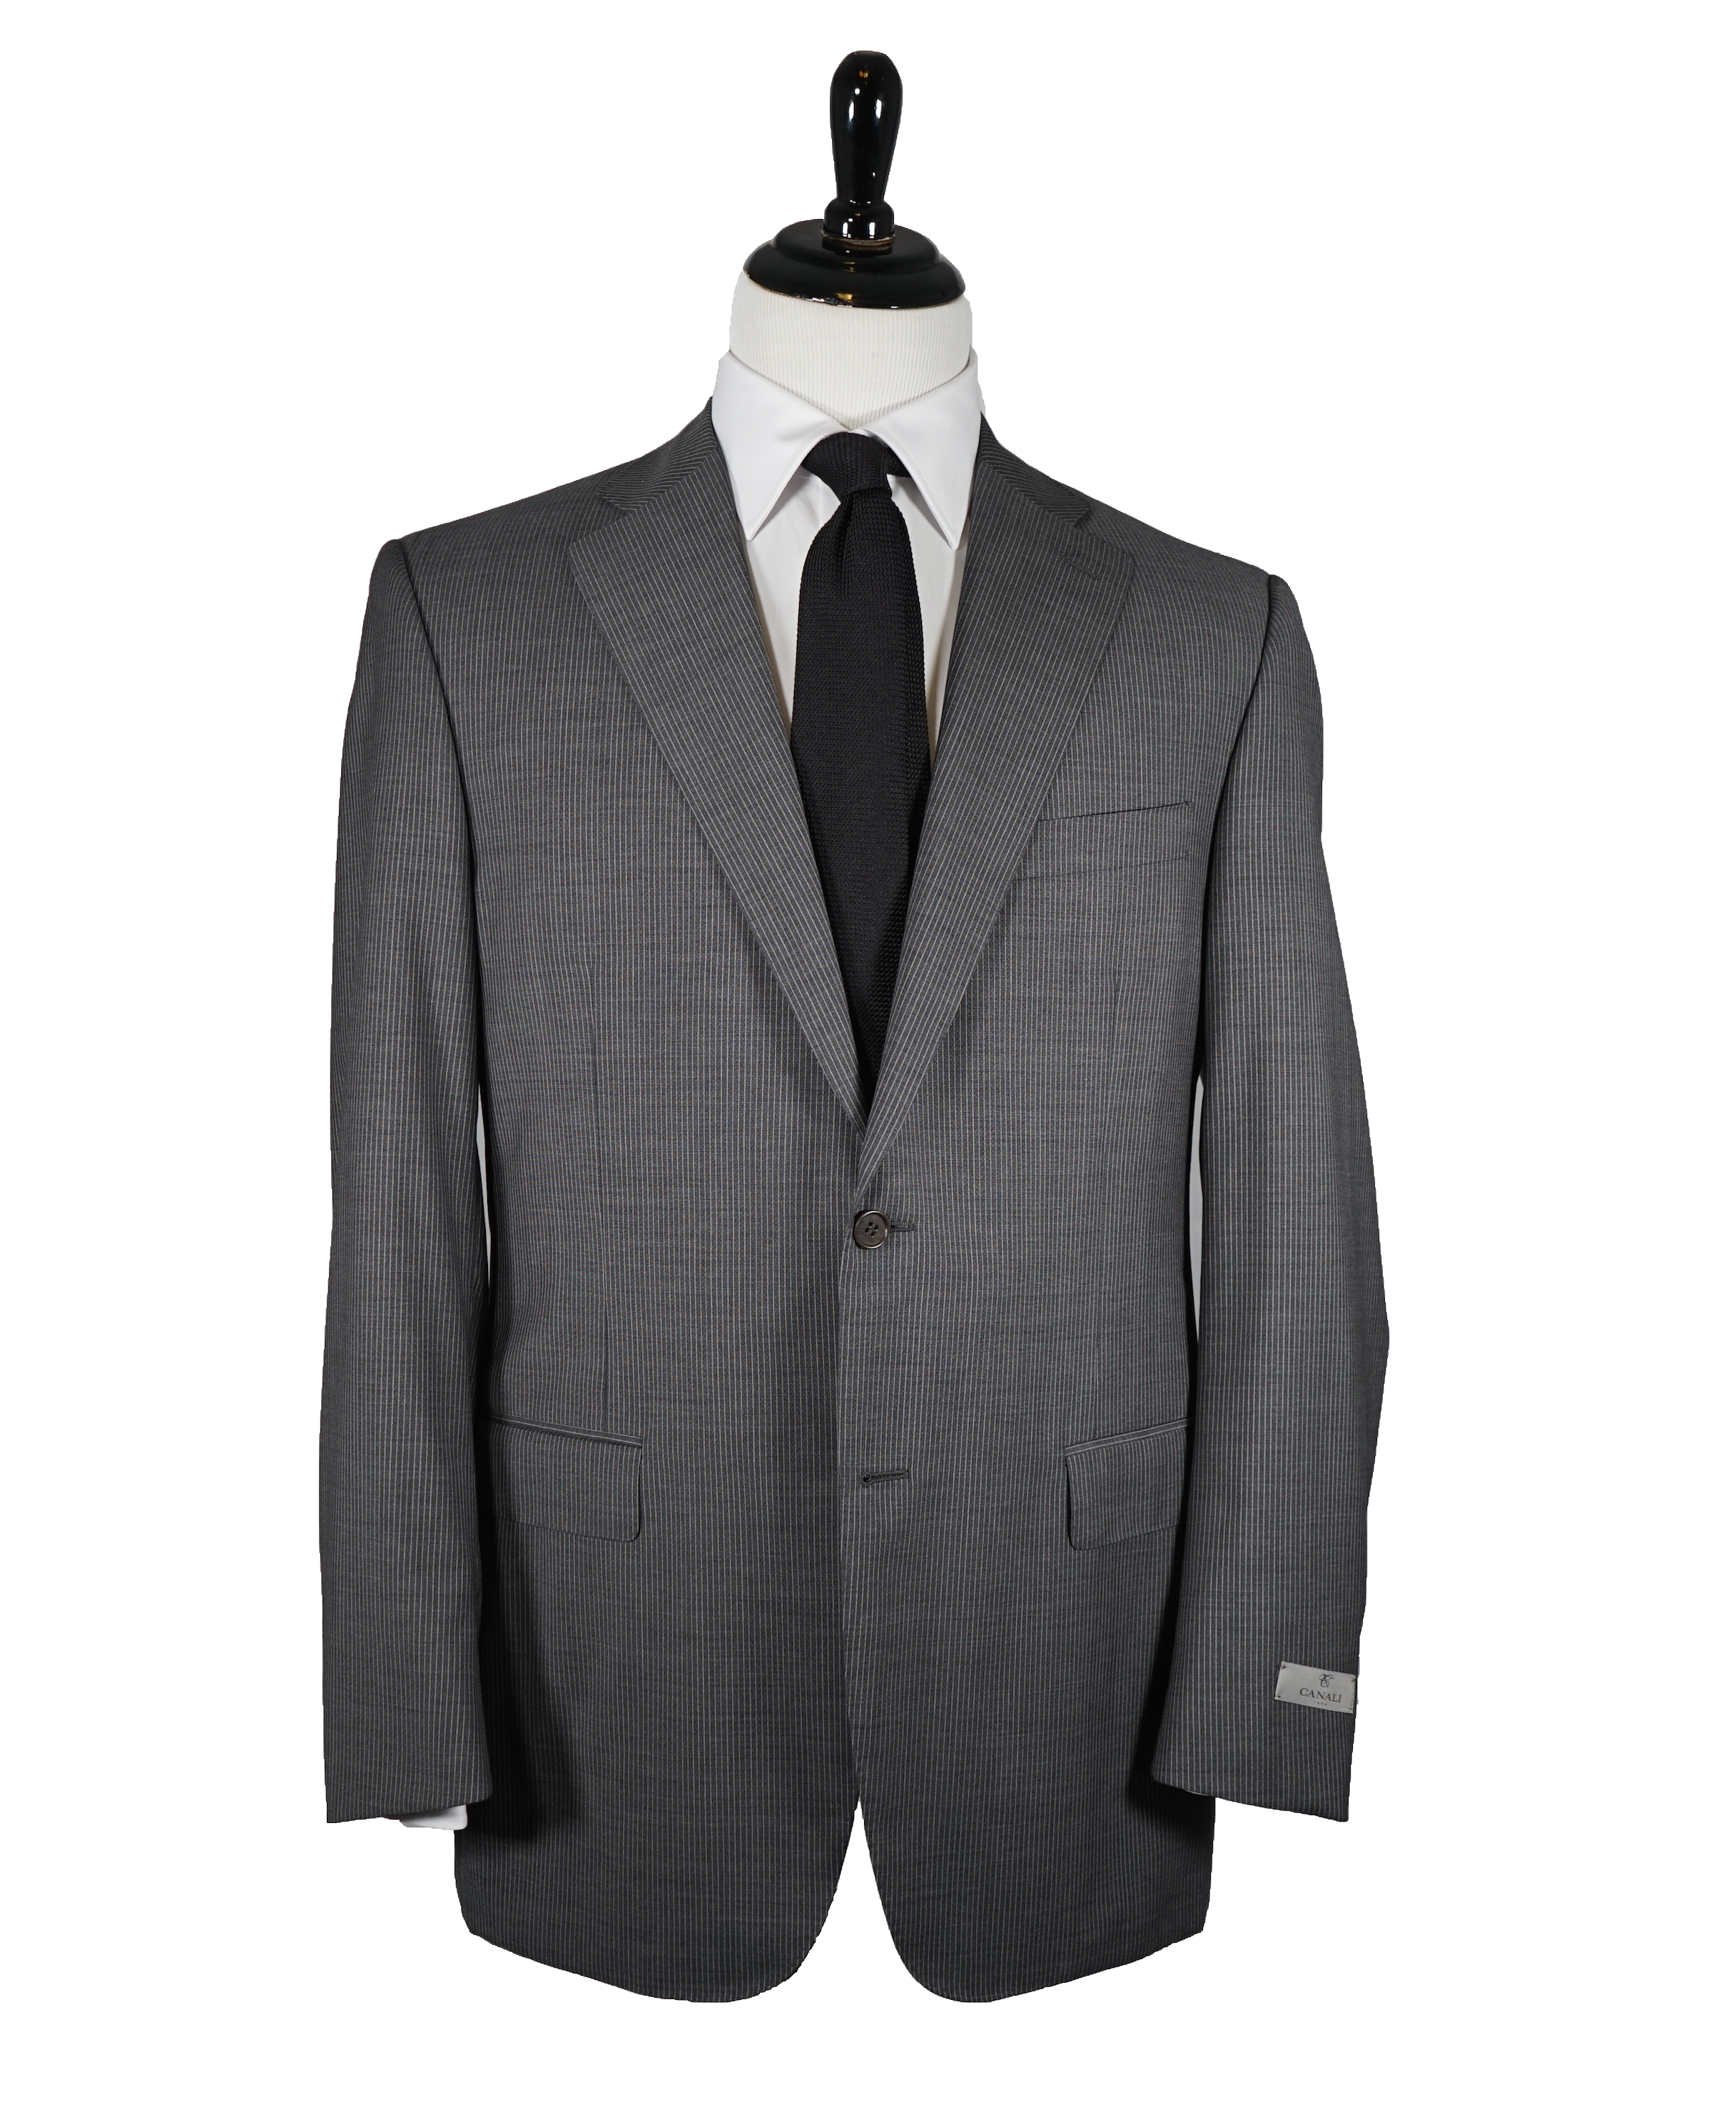 CANALI - Water Resistant Firenze Pinstripe suit - 42L